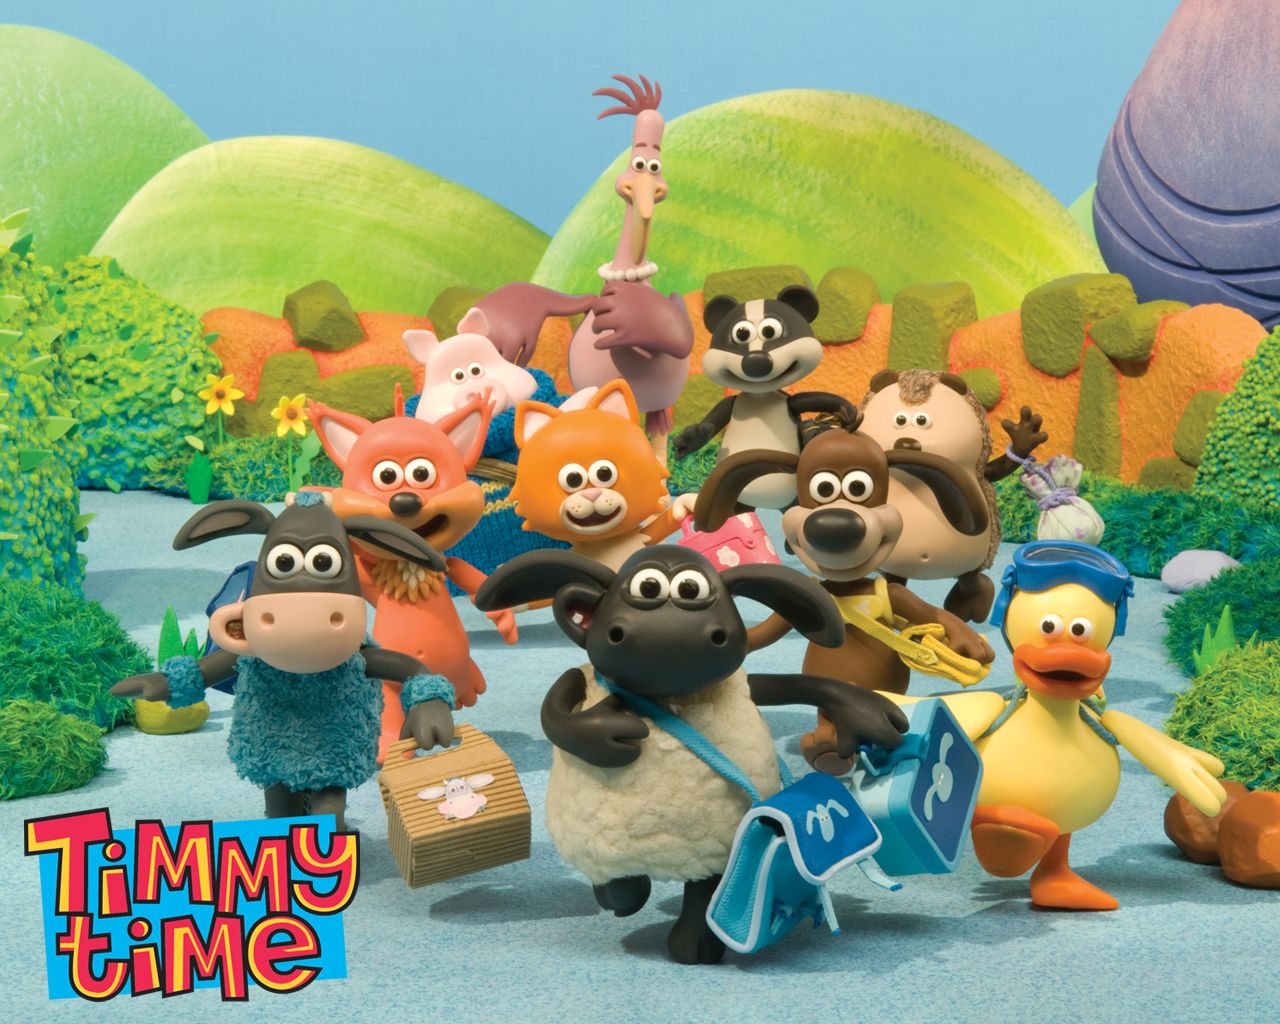 Timmy Time Kids Wallpapers Old kids shows Childhood tv shows